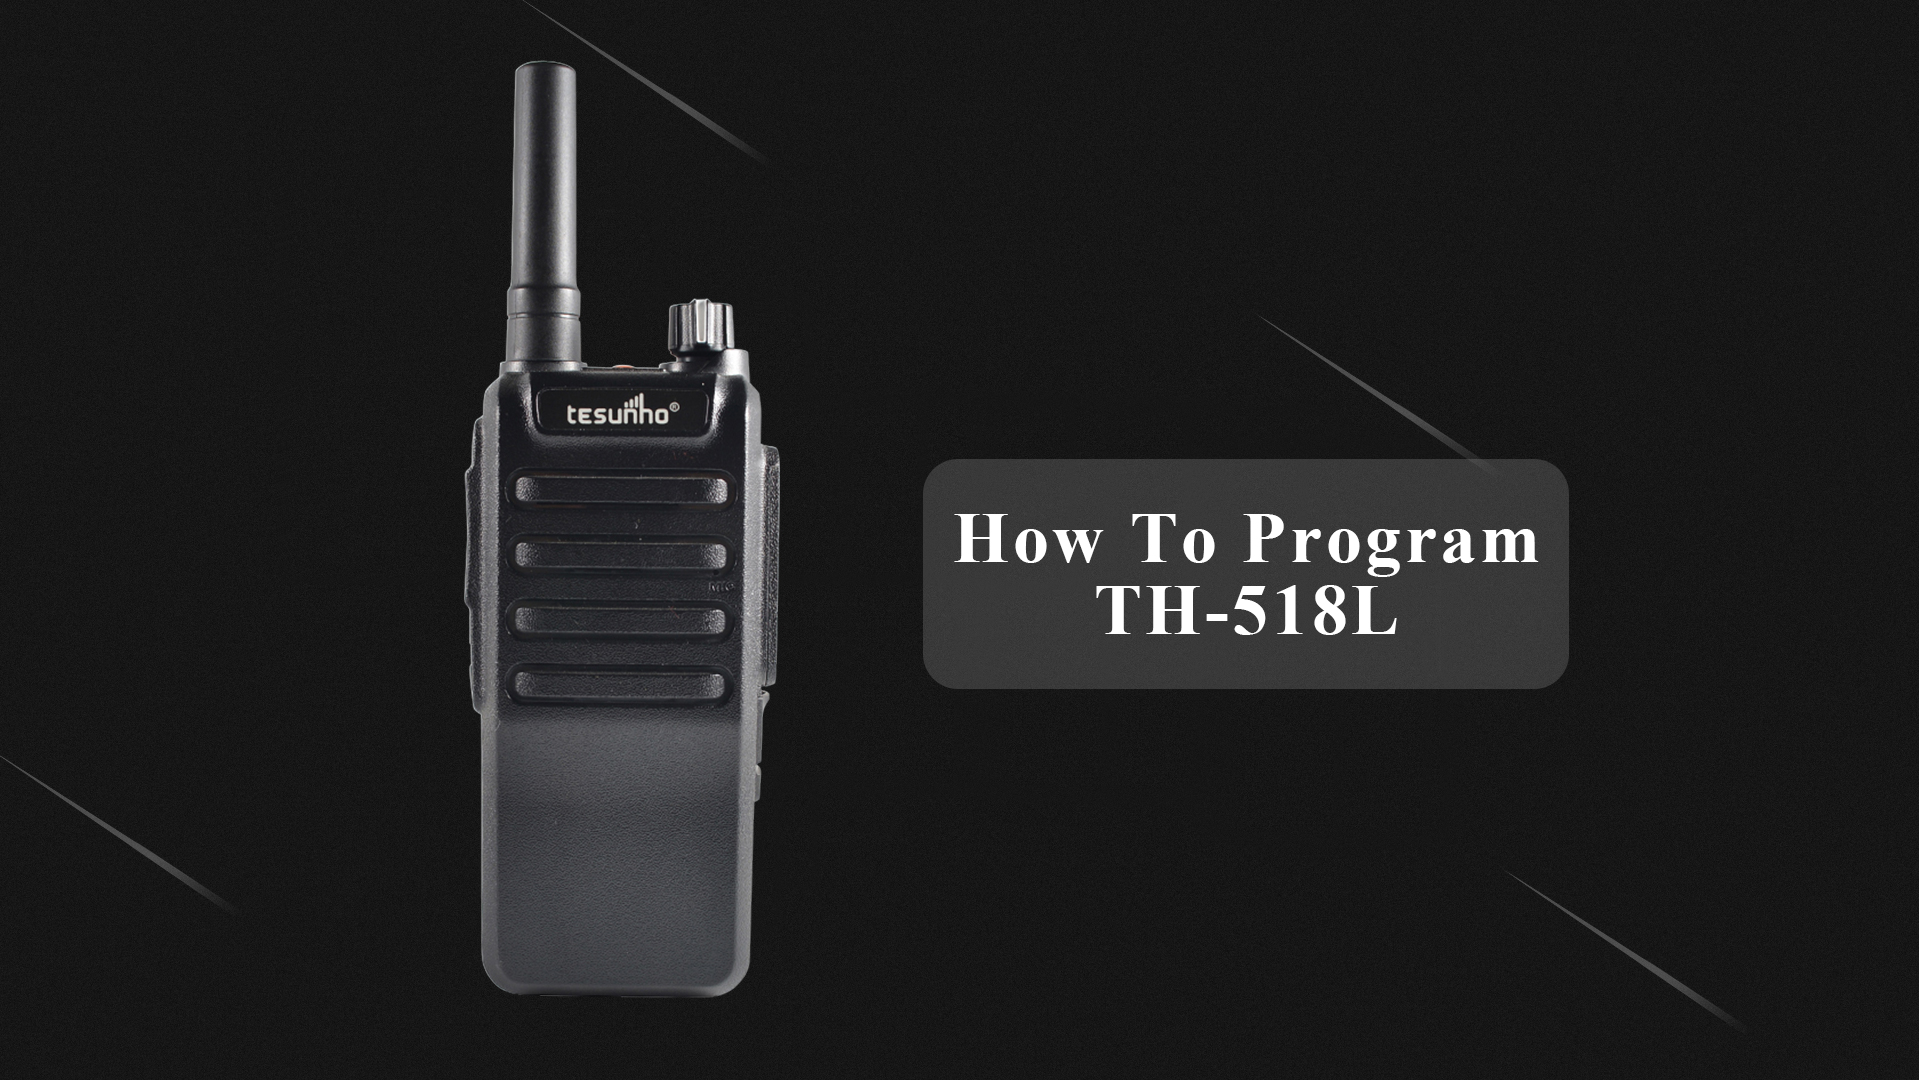 How To Program TH-518L